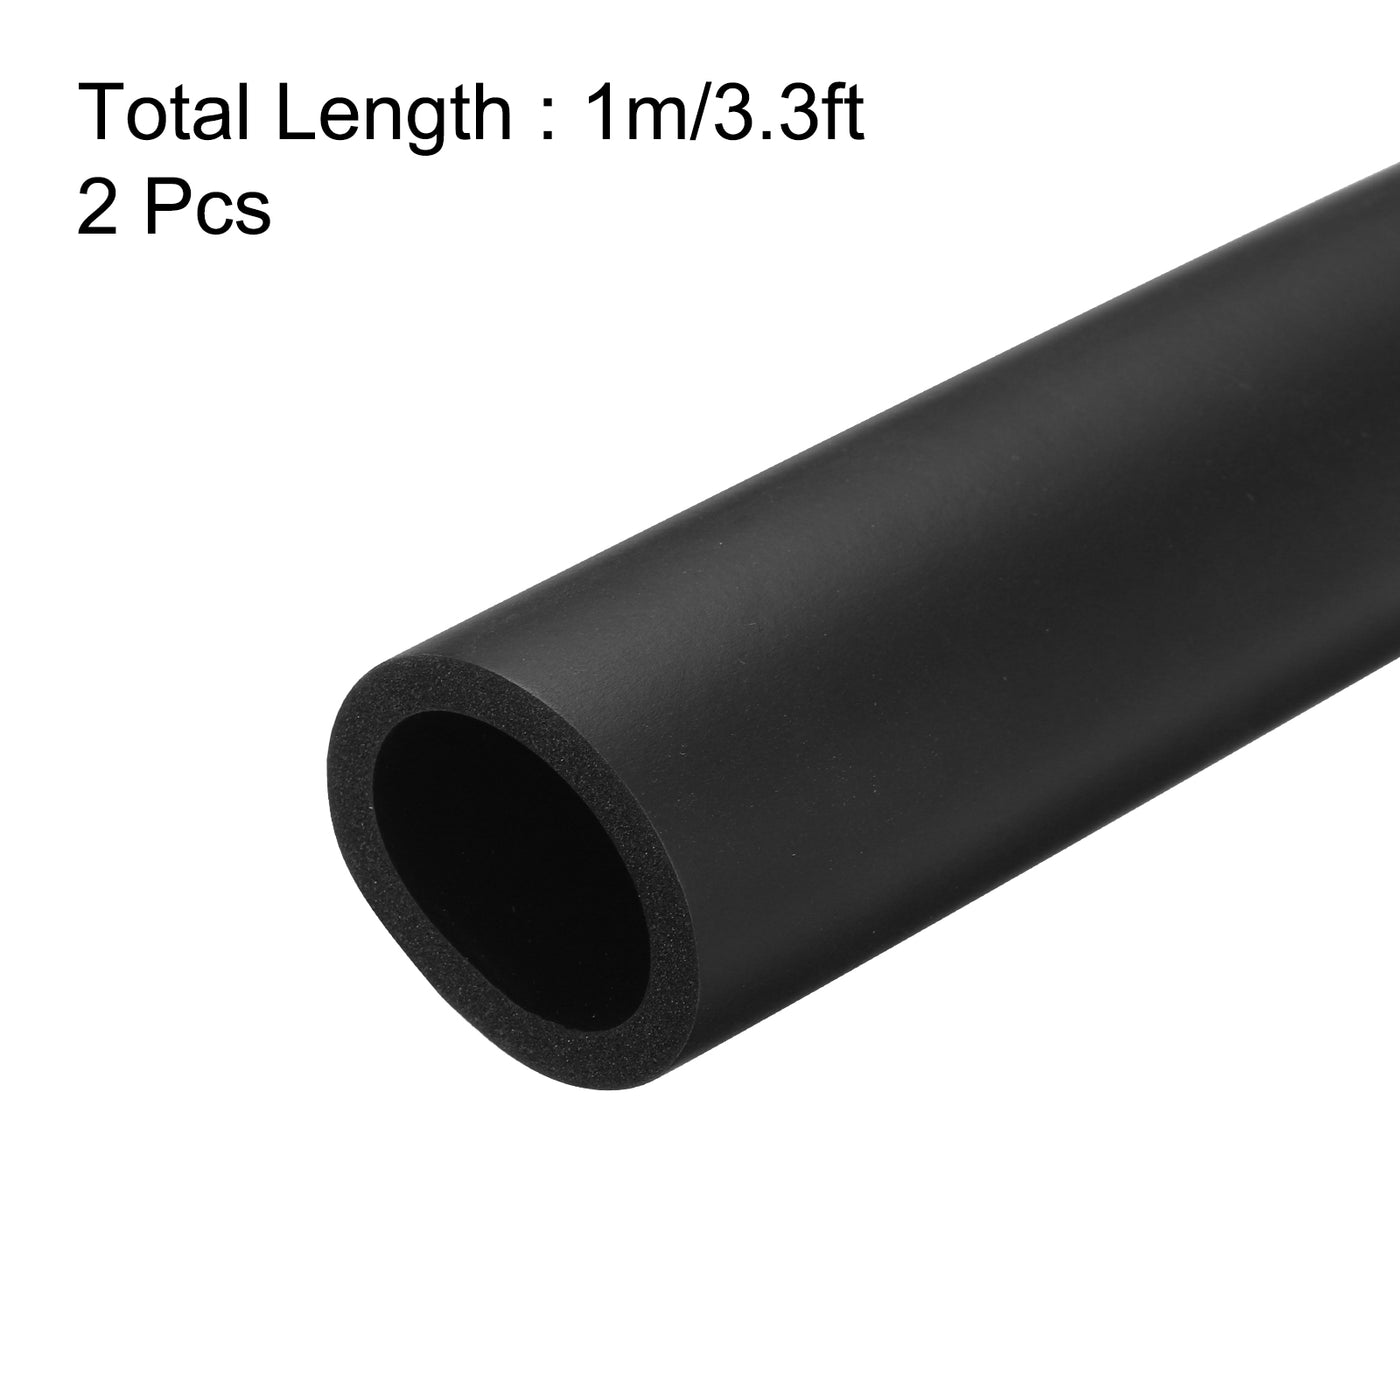 uxcell Uxcell 2pcs 3.3ft Pipe Insulation Tube 1 Inch(25mm) ID 35mm OD Foam Tubing for Handle Grip Support, Black